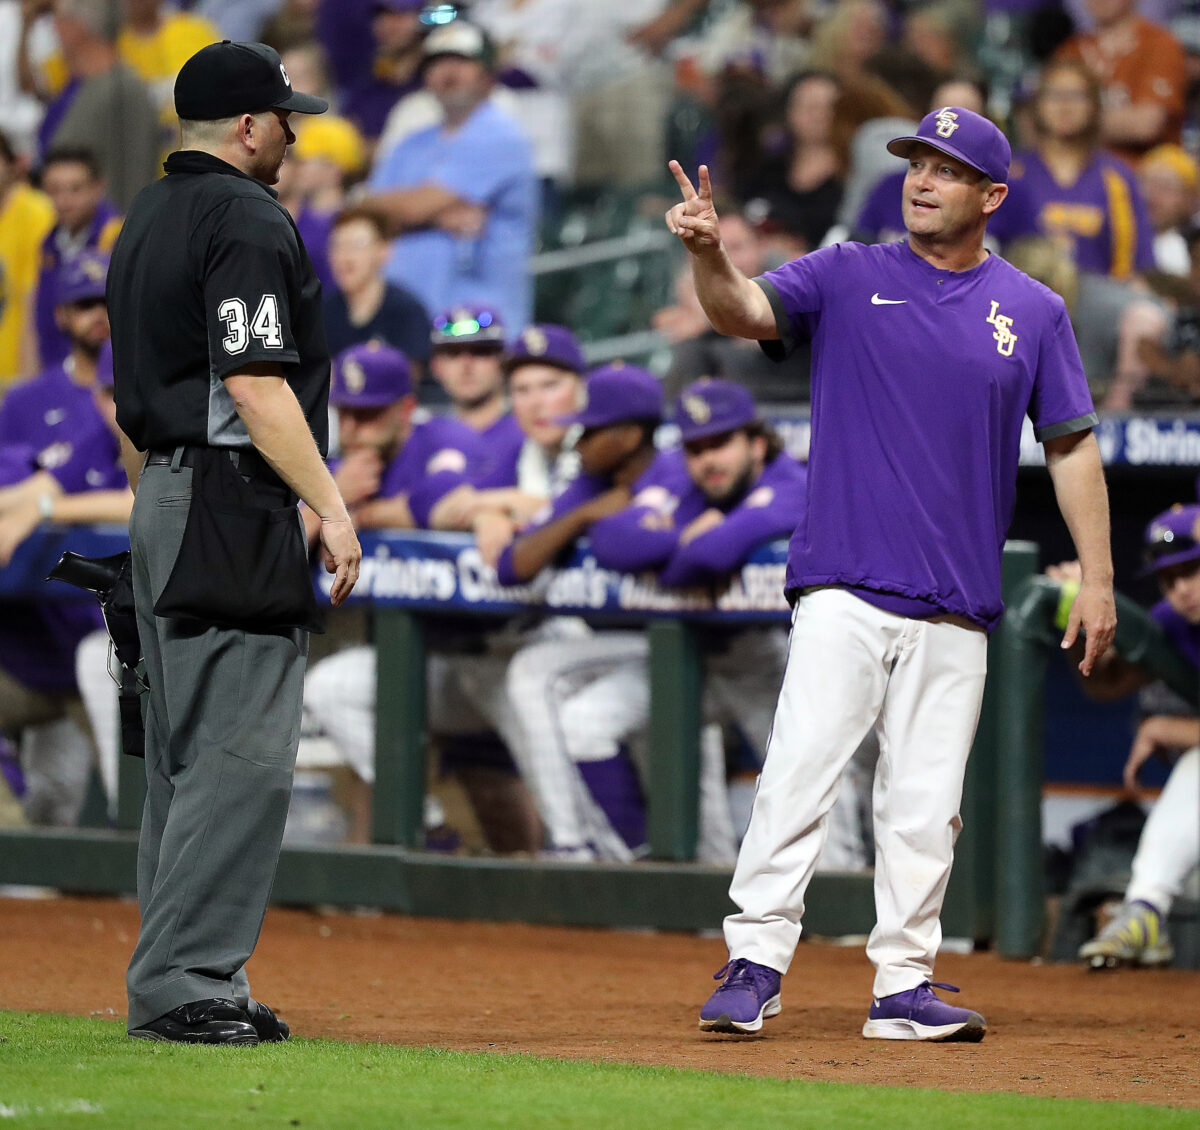 How to watch LSU baseball on Wednesday night against McNeese State